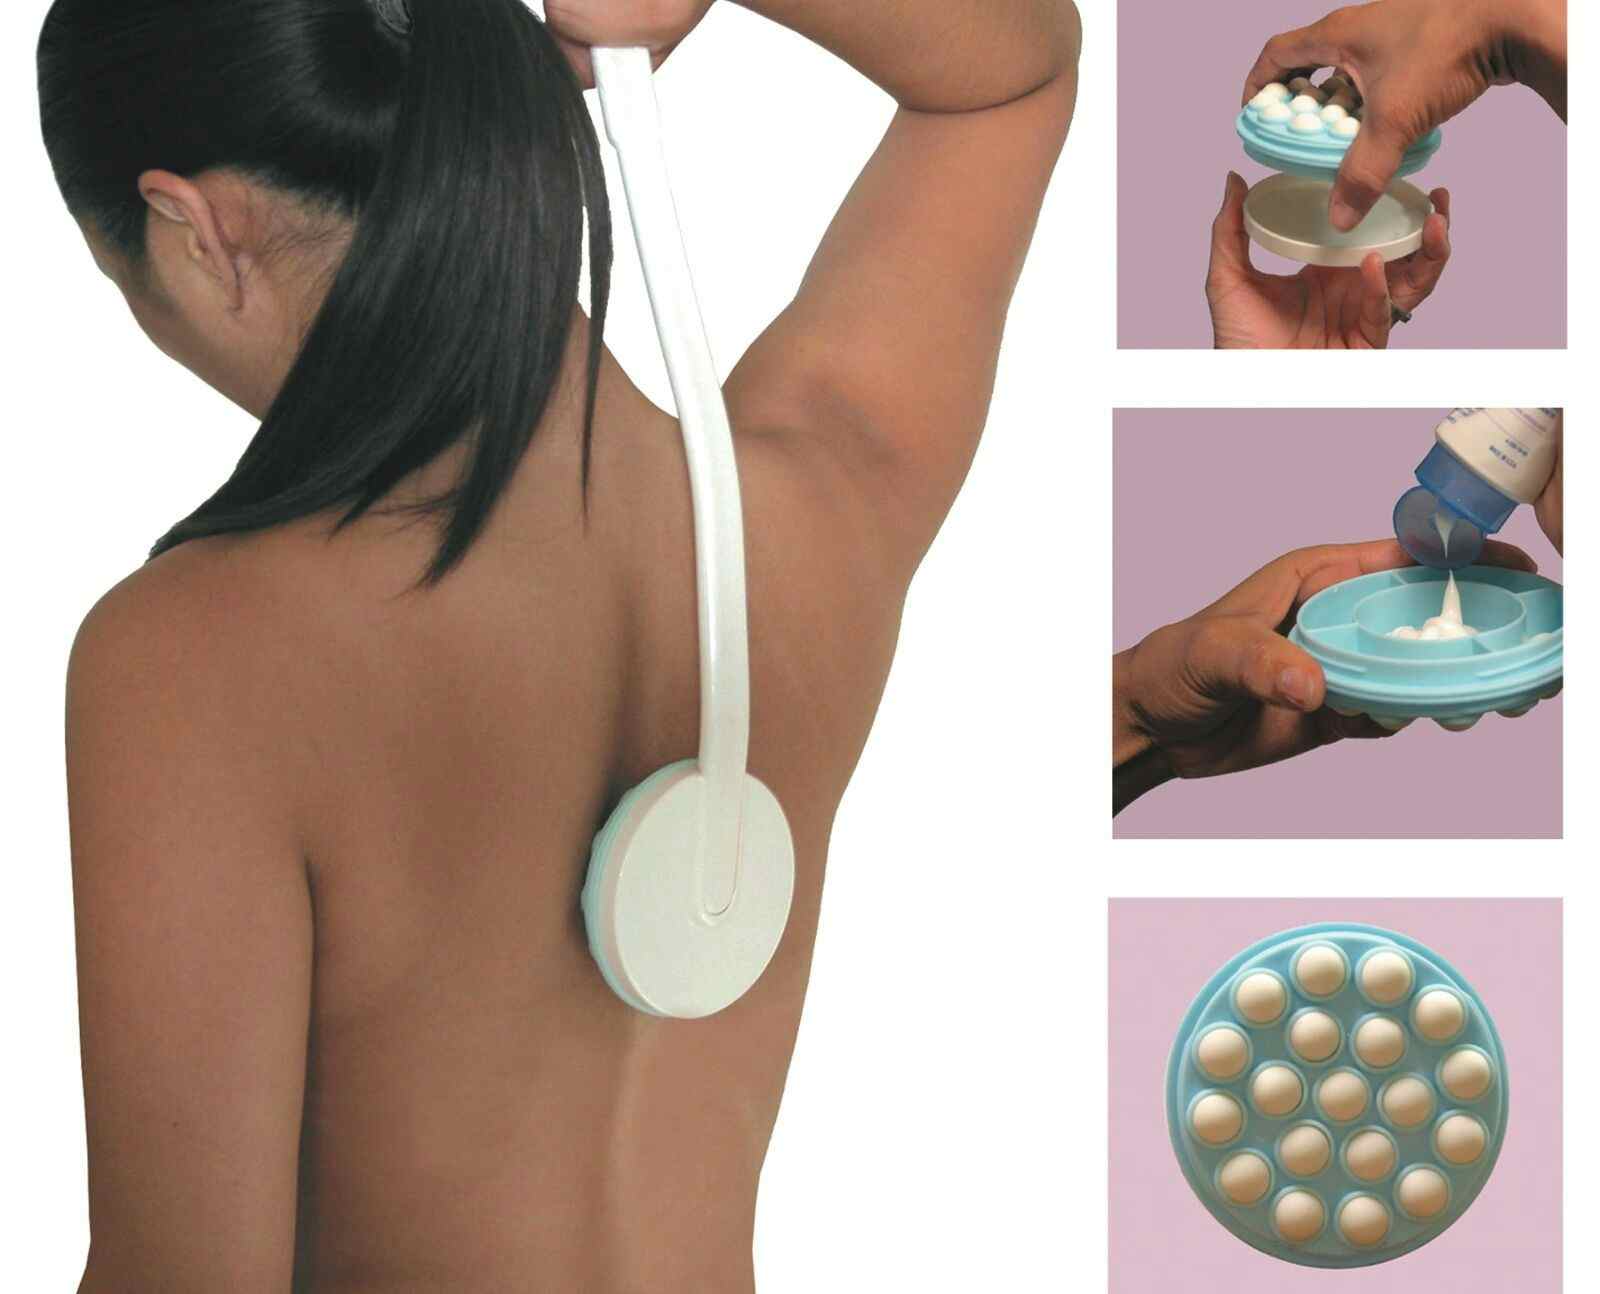 Jobar Roll-A-Lotion Applicator, how to use